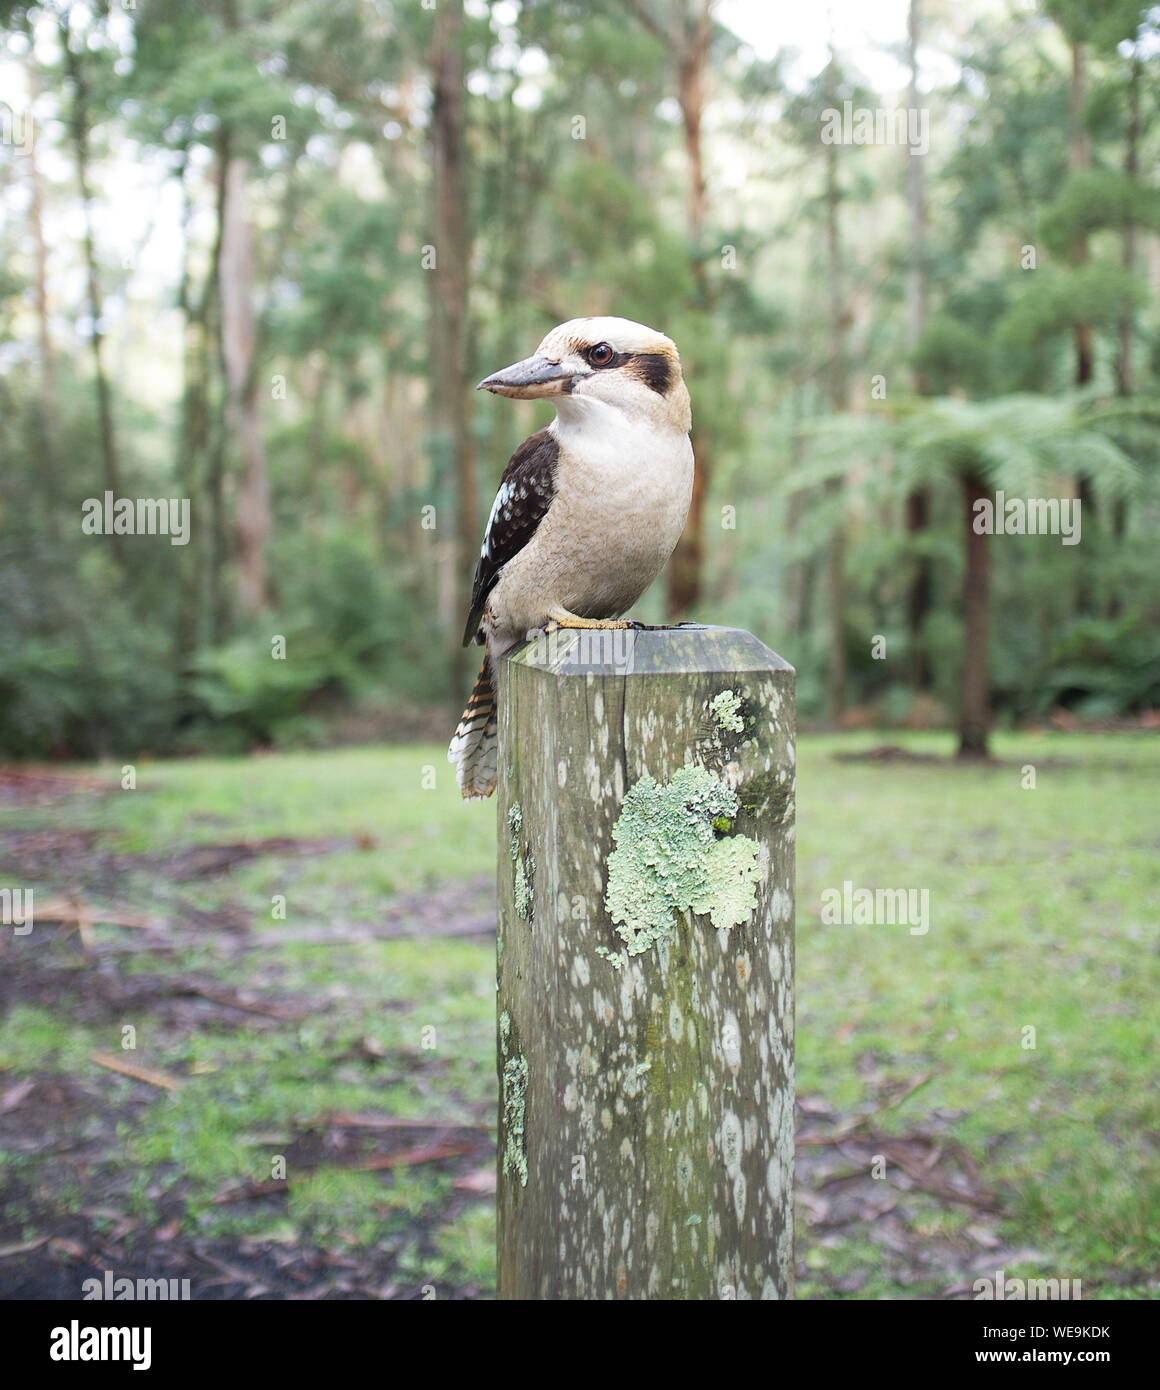 Close-up Of Bird Perching On Wooden Post Stock Photo